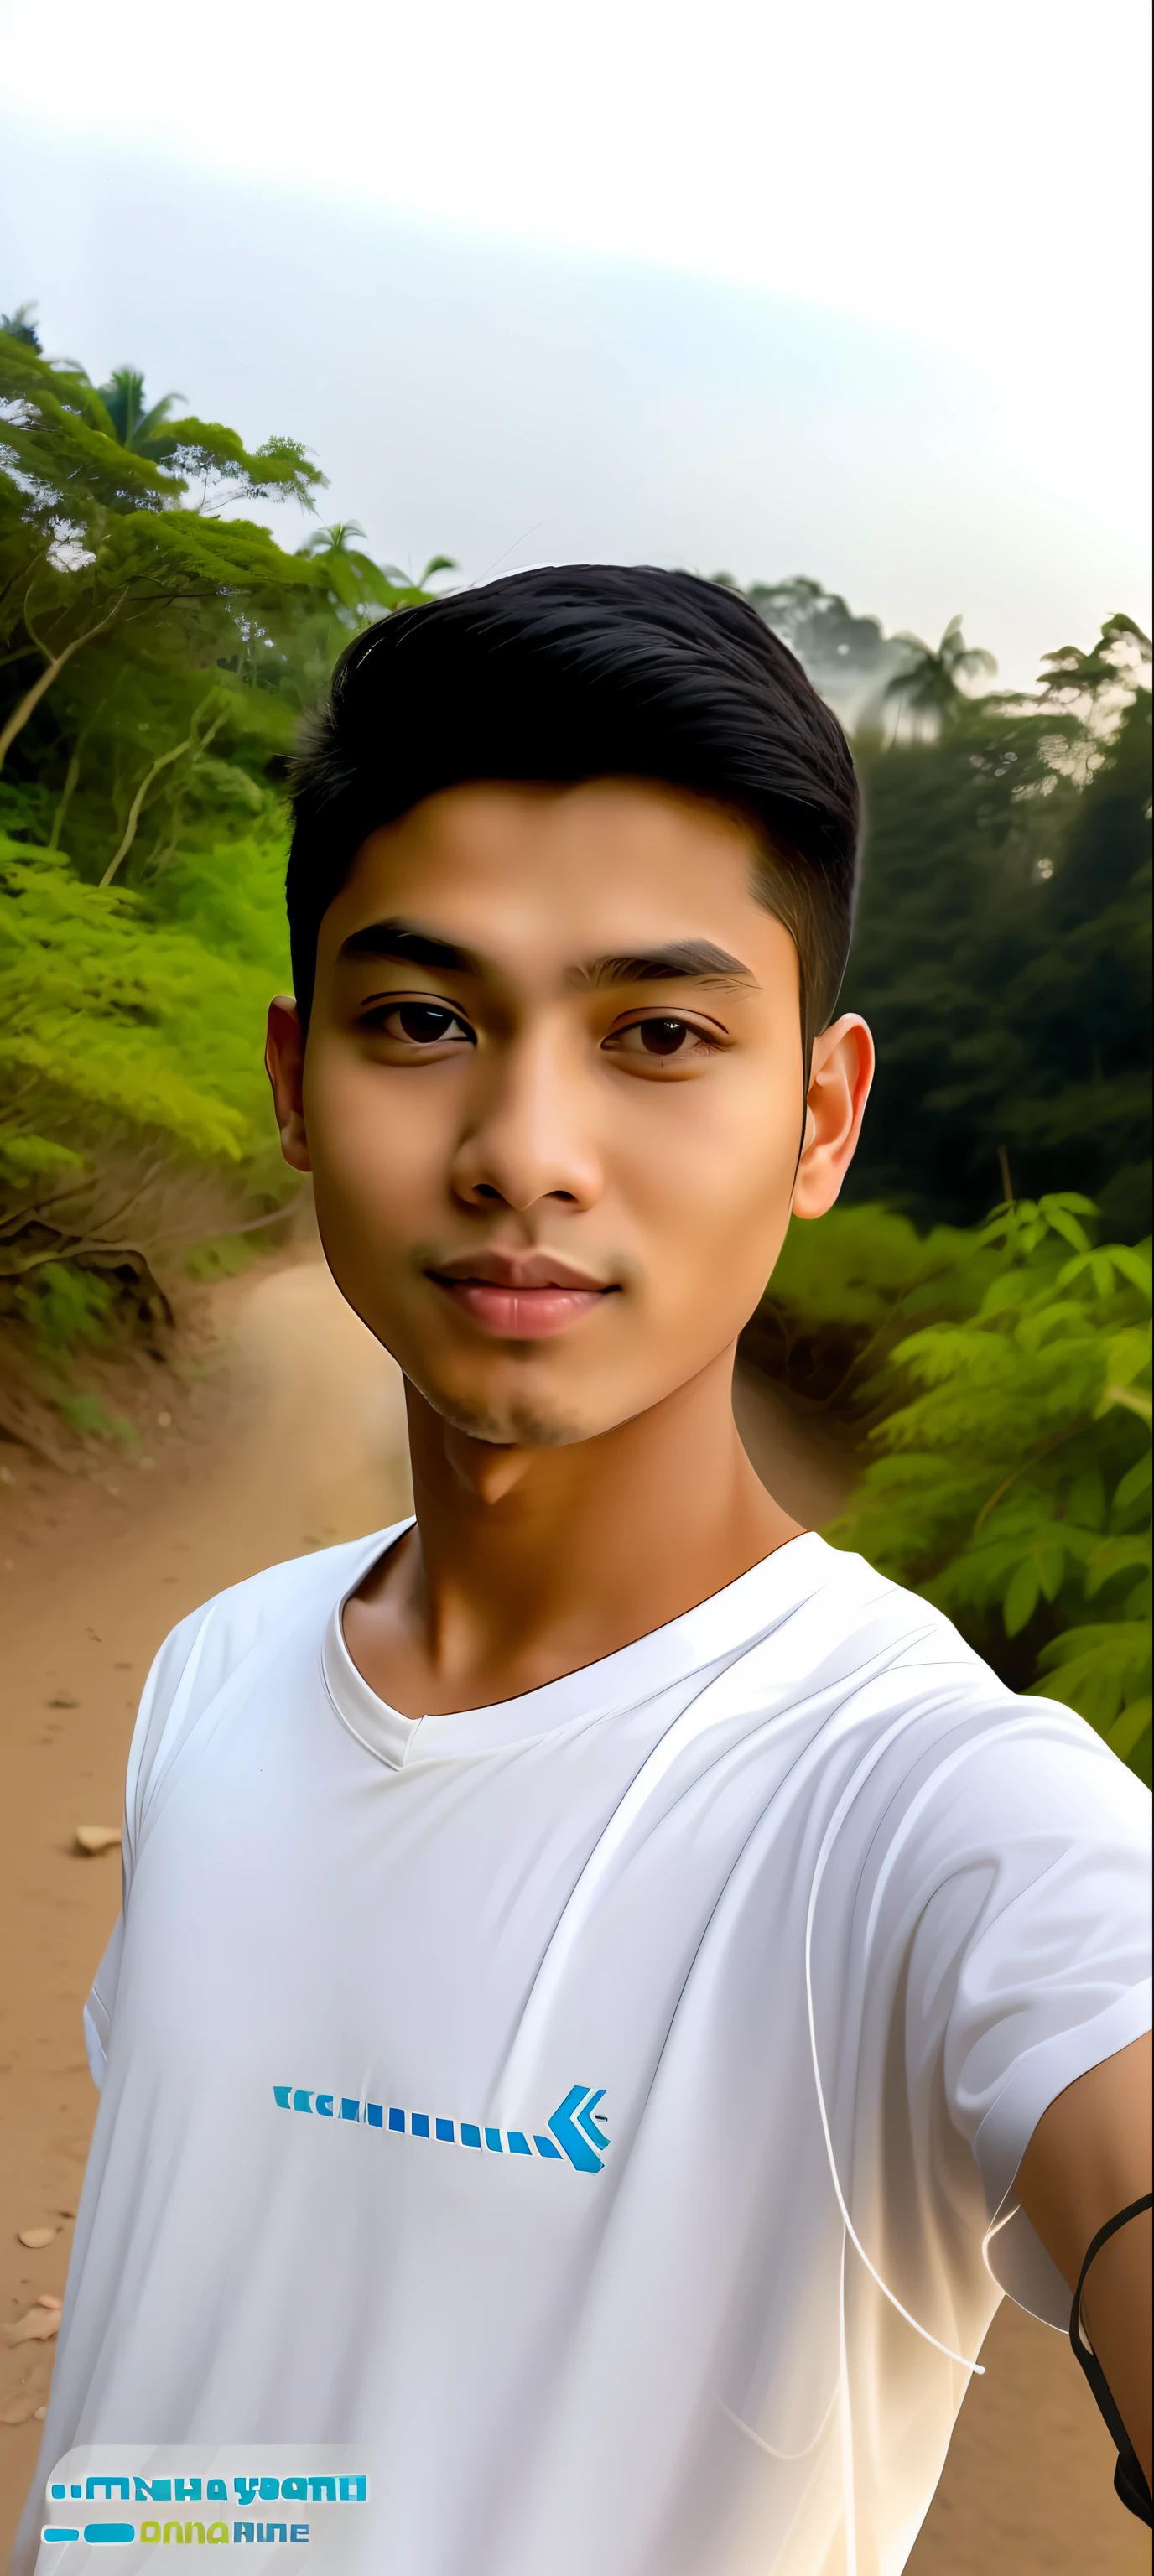 there is a man that is taking a selfie with his cell phone, ayan nag, nivanh chanthara, around 1 9 years old, south east asian with round face, with accurate face, in front of a forest background, with kind face, mohamed chahin, young face, assamese, male teenager, ismail, without helmet, teenage boy